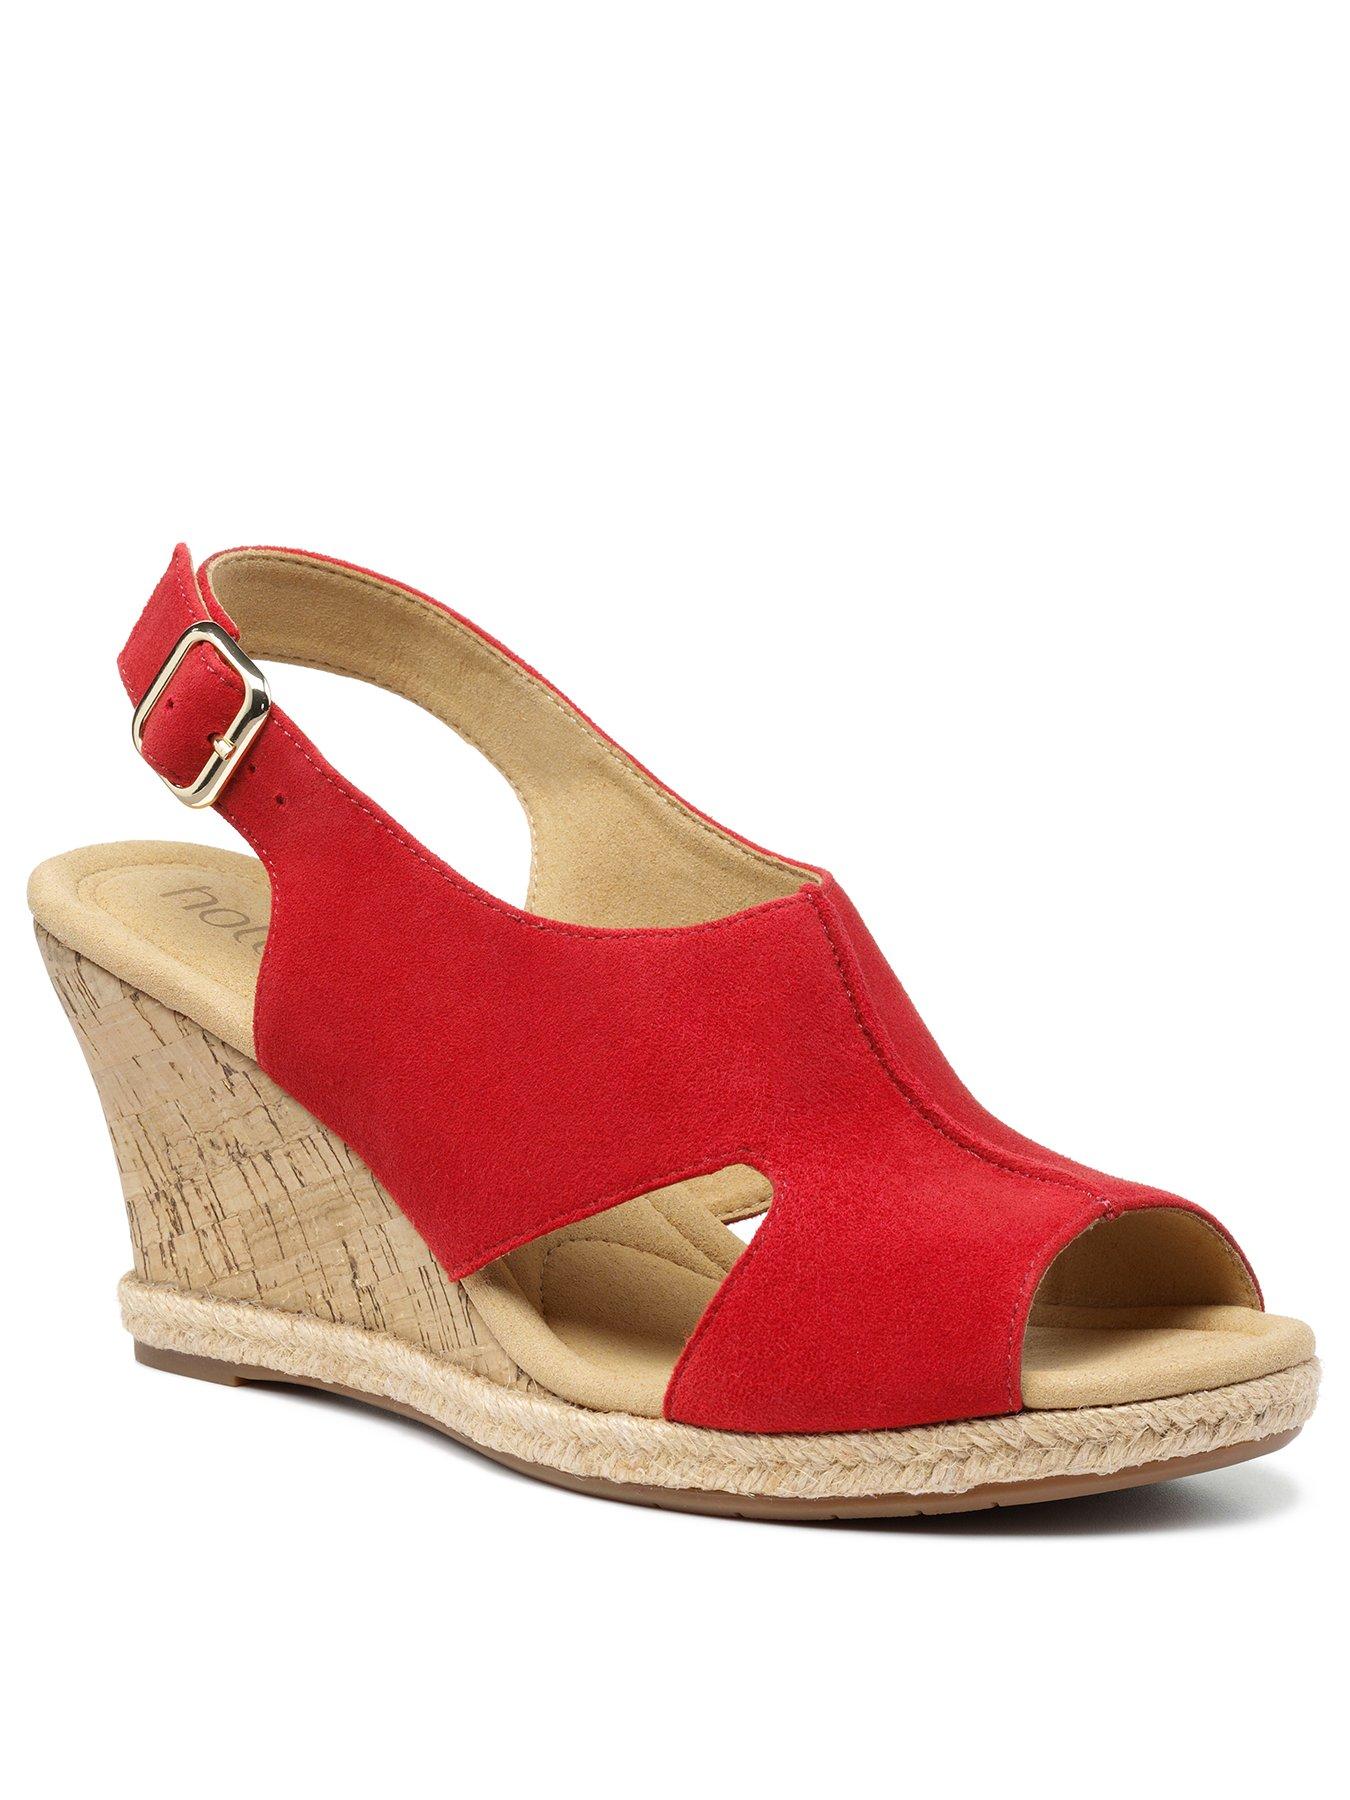 hotter red sandals